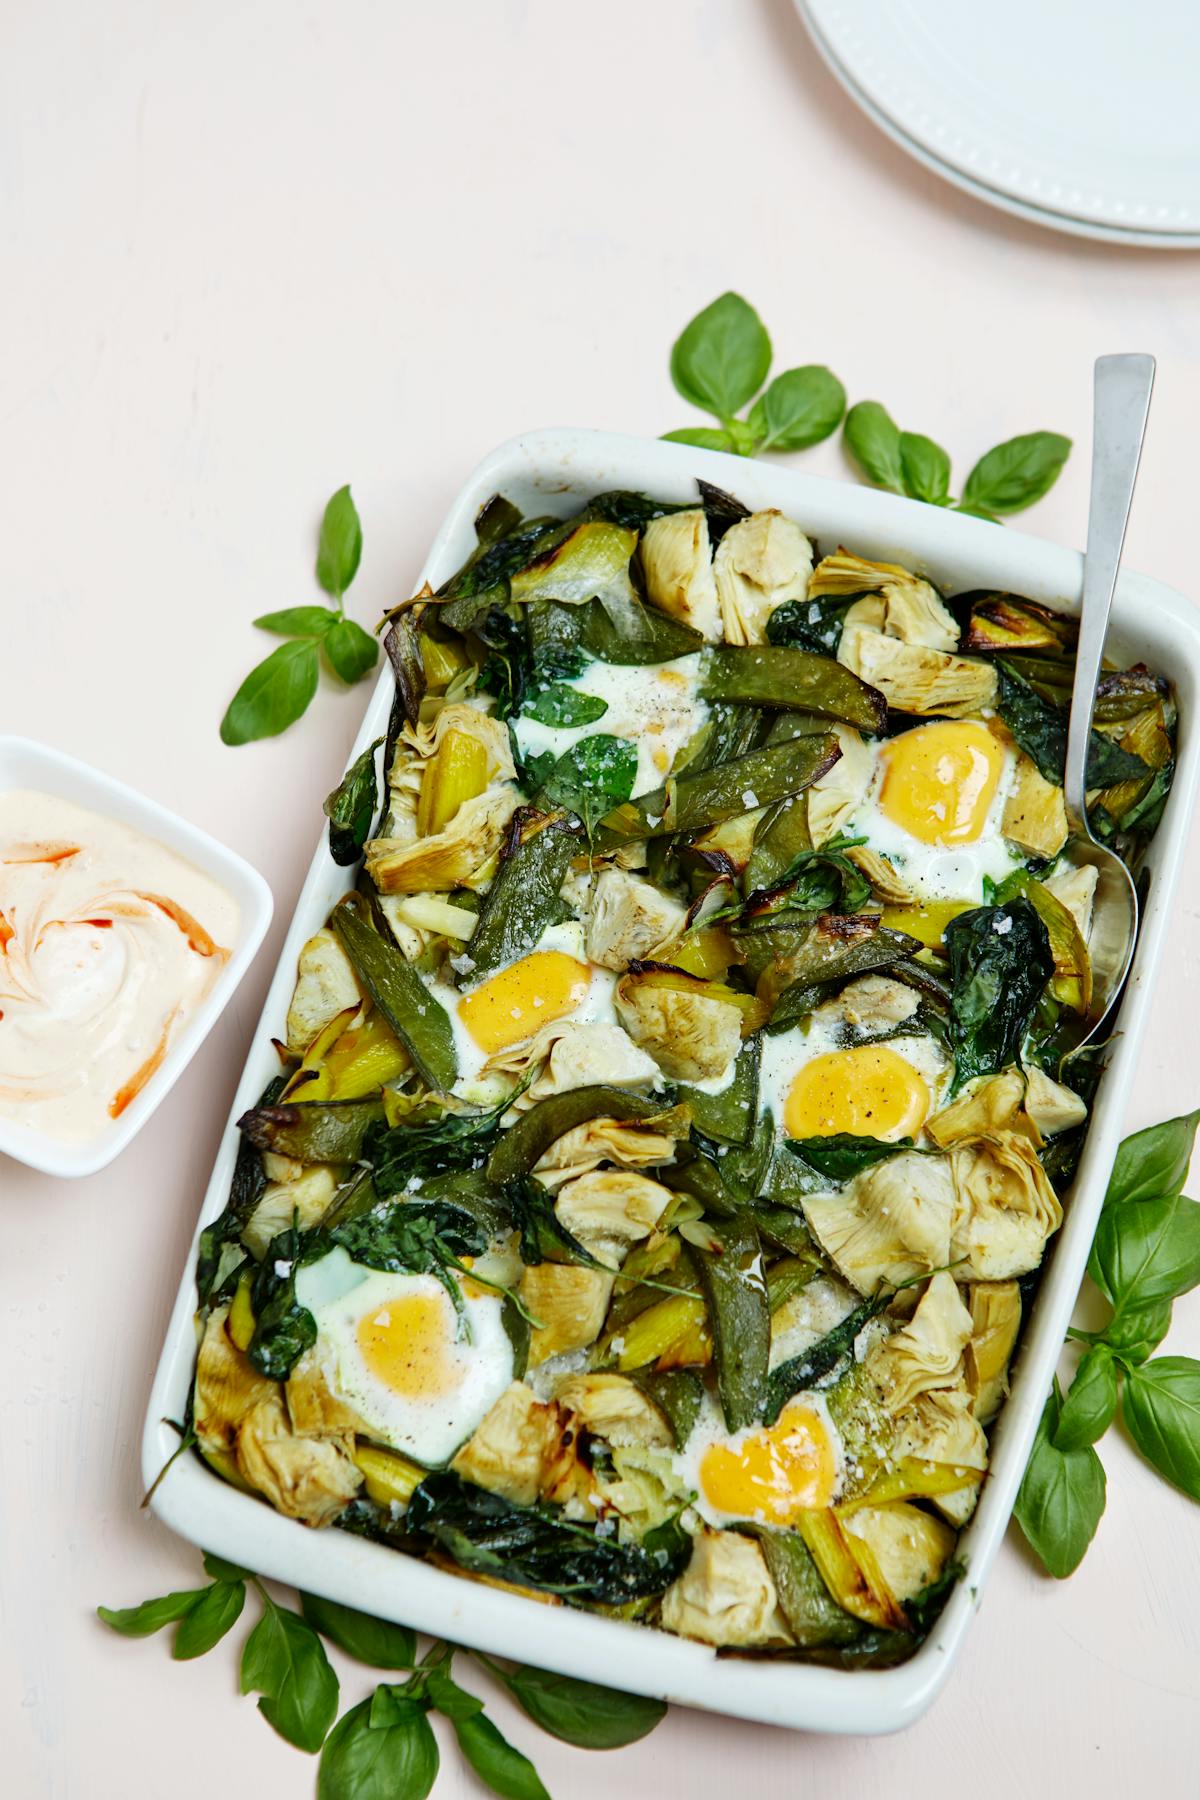 Baked eggs with veggies and spicy yogurt sauce